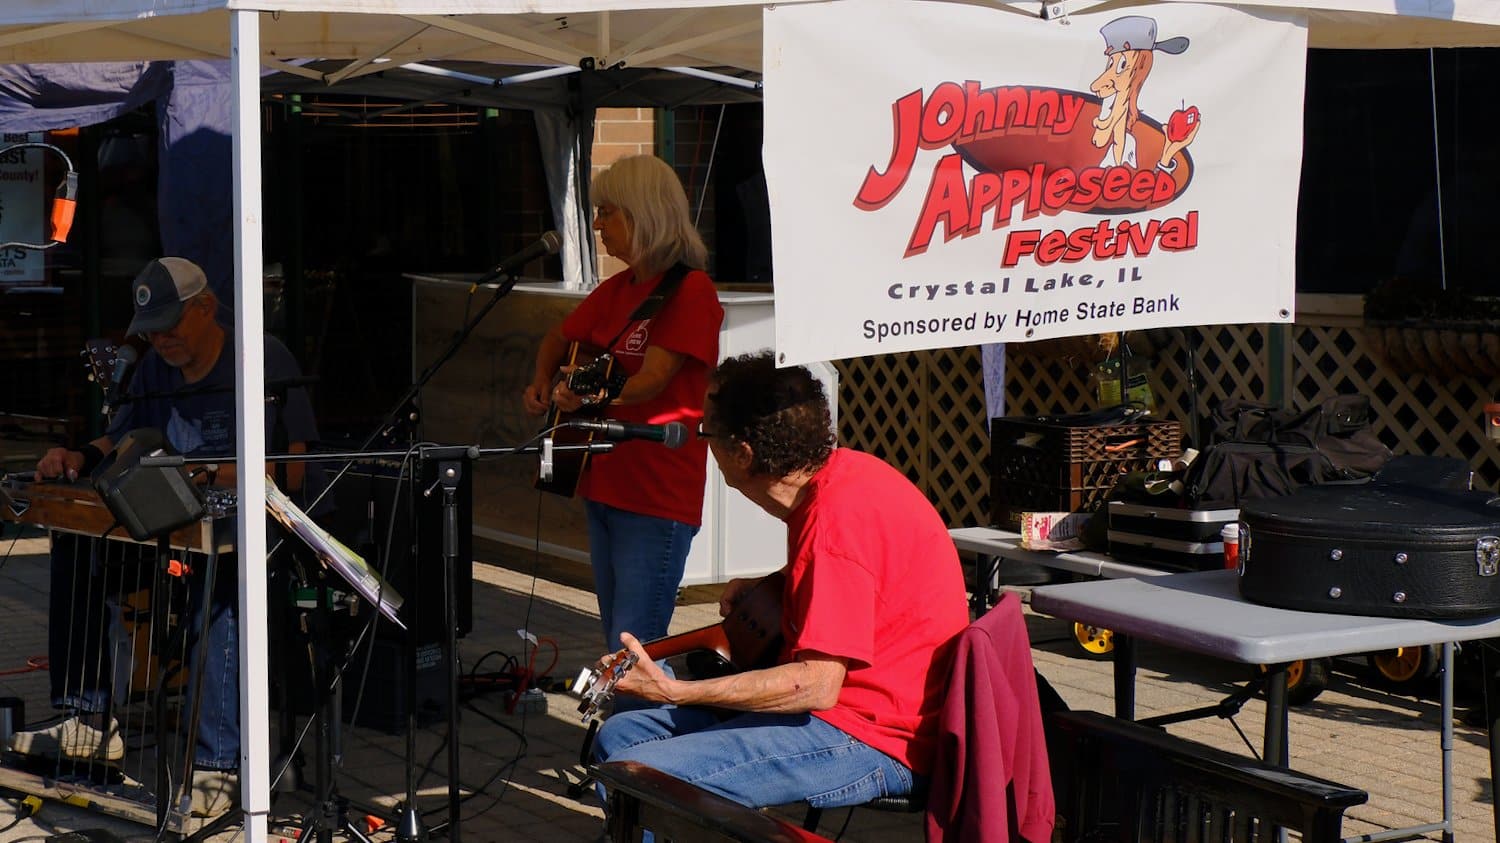 Northwest Highway band performing at the Johnny Appleseed Festival.